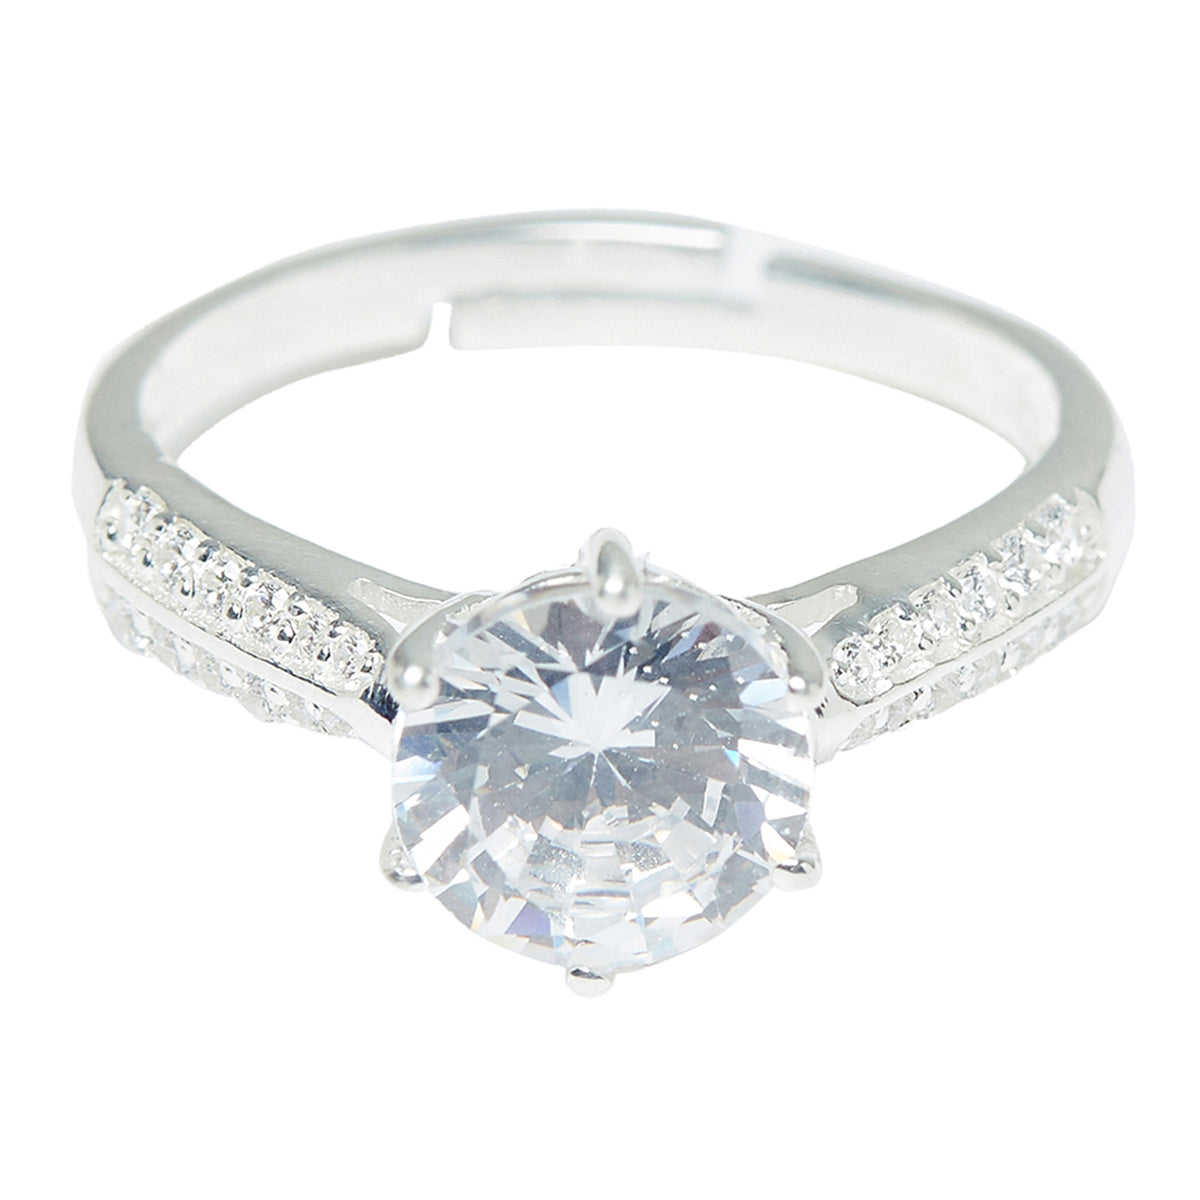 Gorgeous 925 Sterling Silver Ring with CZ Stones